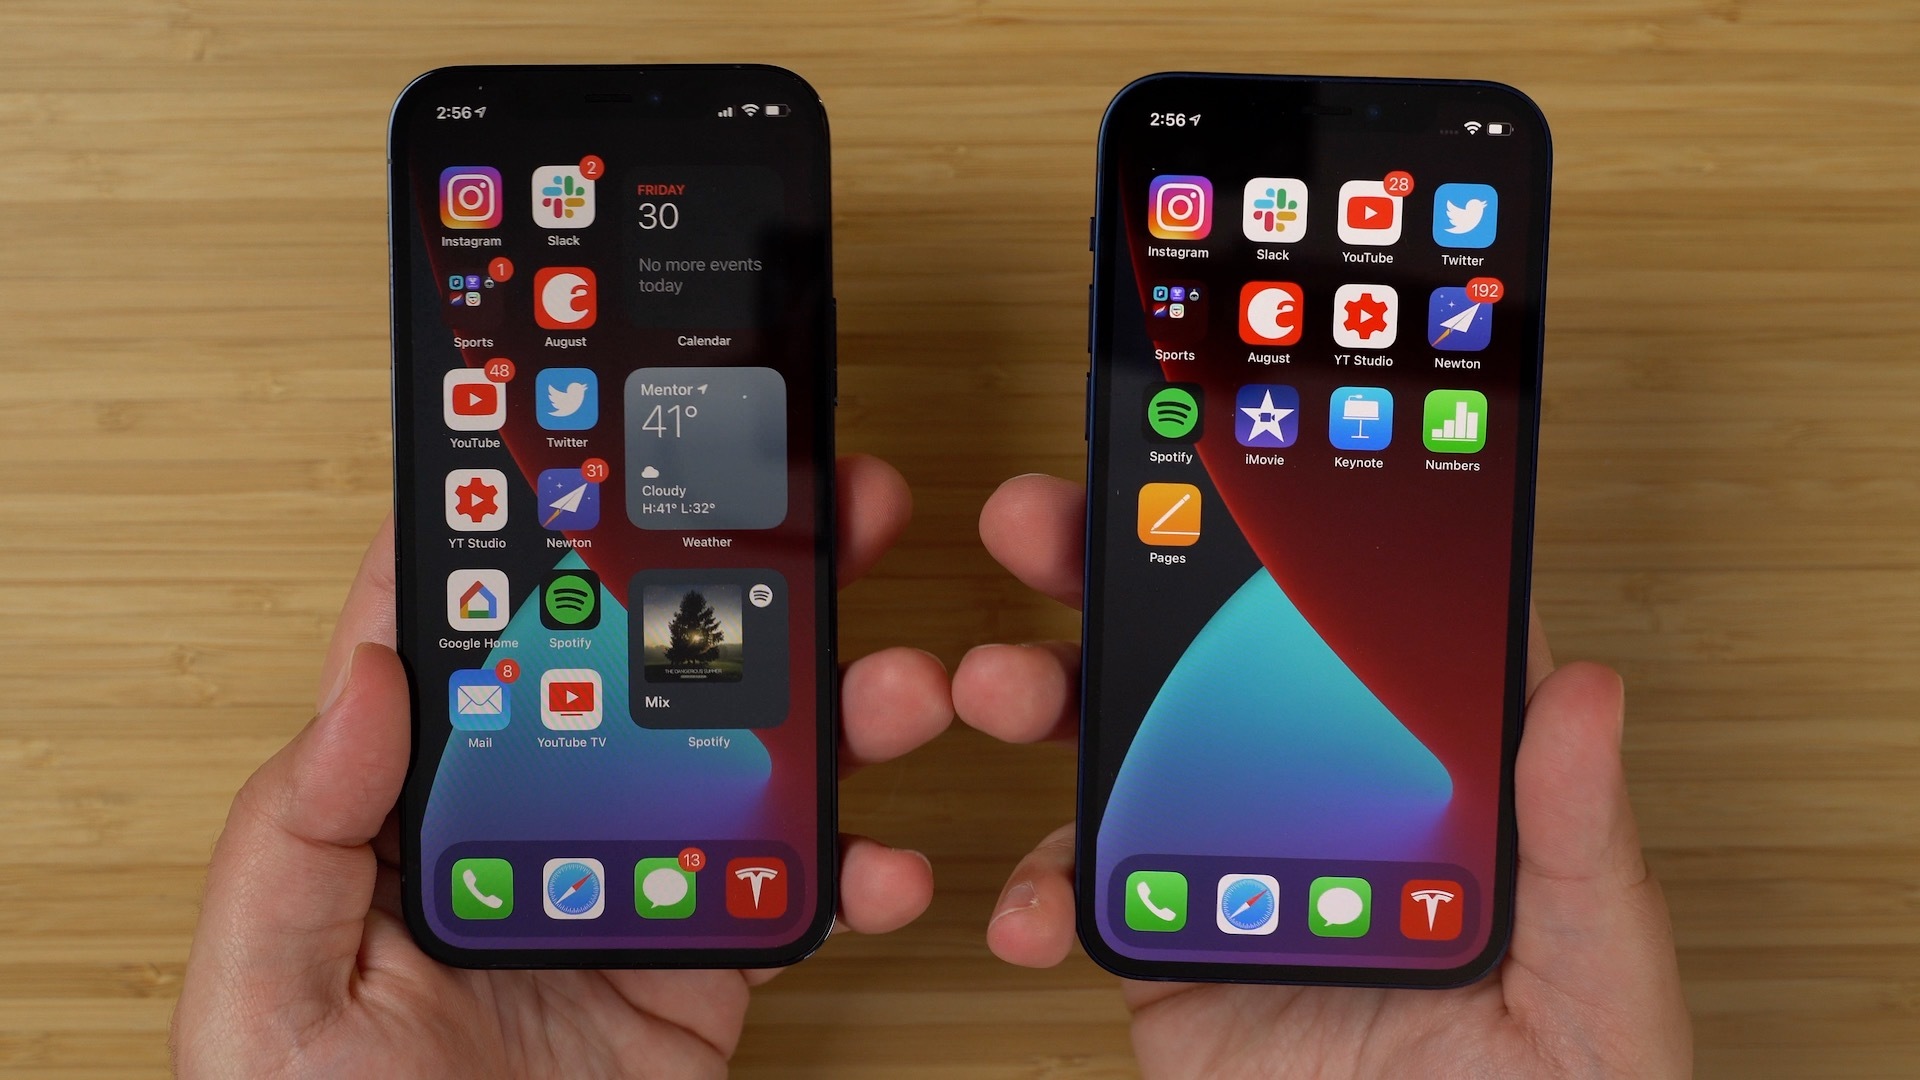 iPhone 12 & iPhone 12 Pro review: Family resemblance – Six Colors